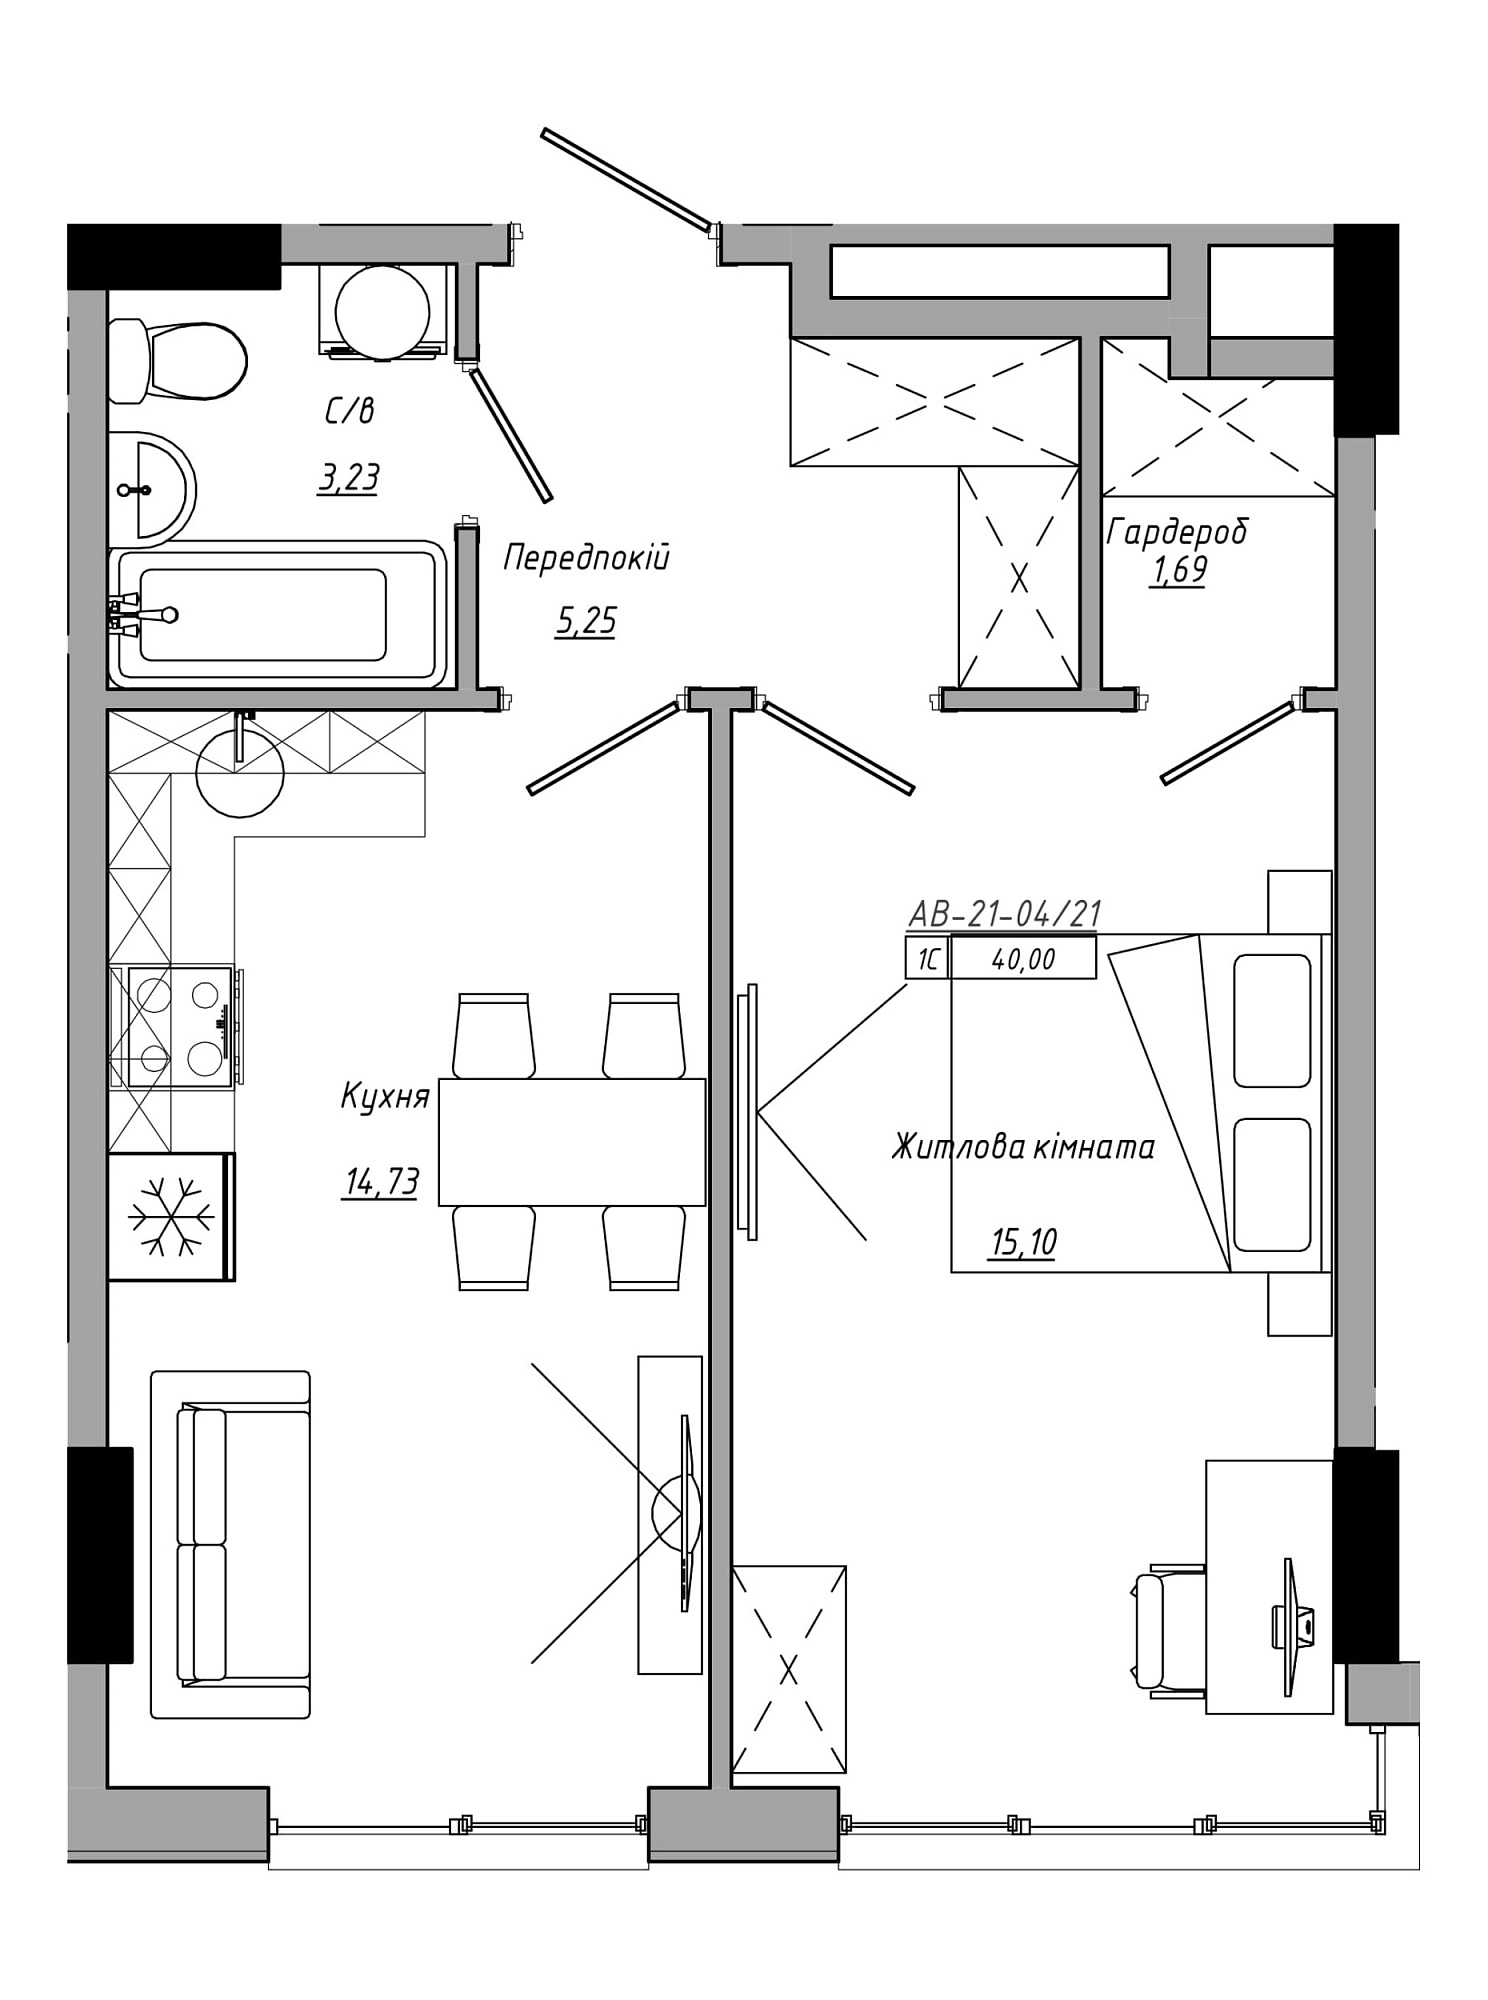 Planning 1-rm flats area 40m2, AB-21-04/00021.